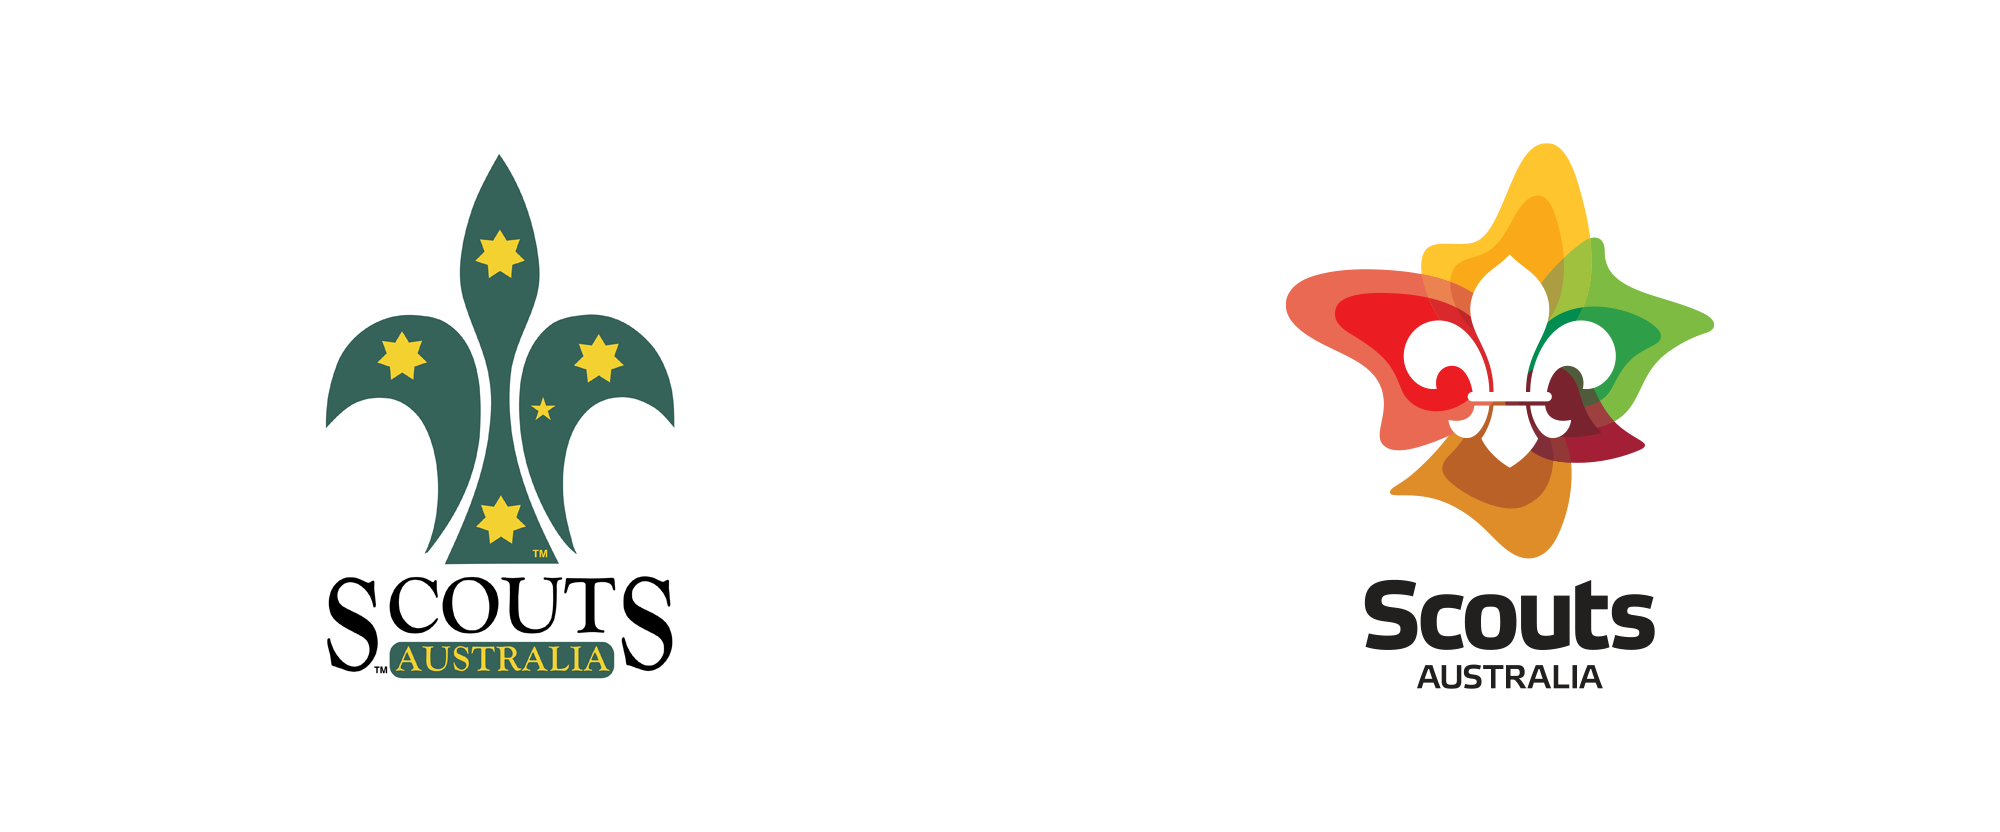 New Logo and Identity for Scouts Australia by Cato Brand Partners